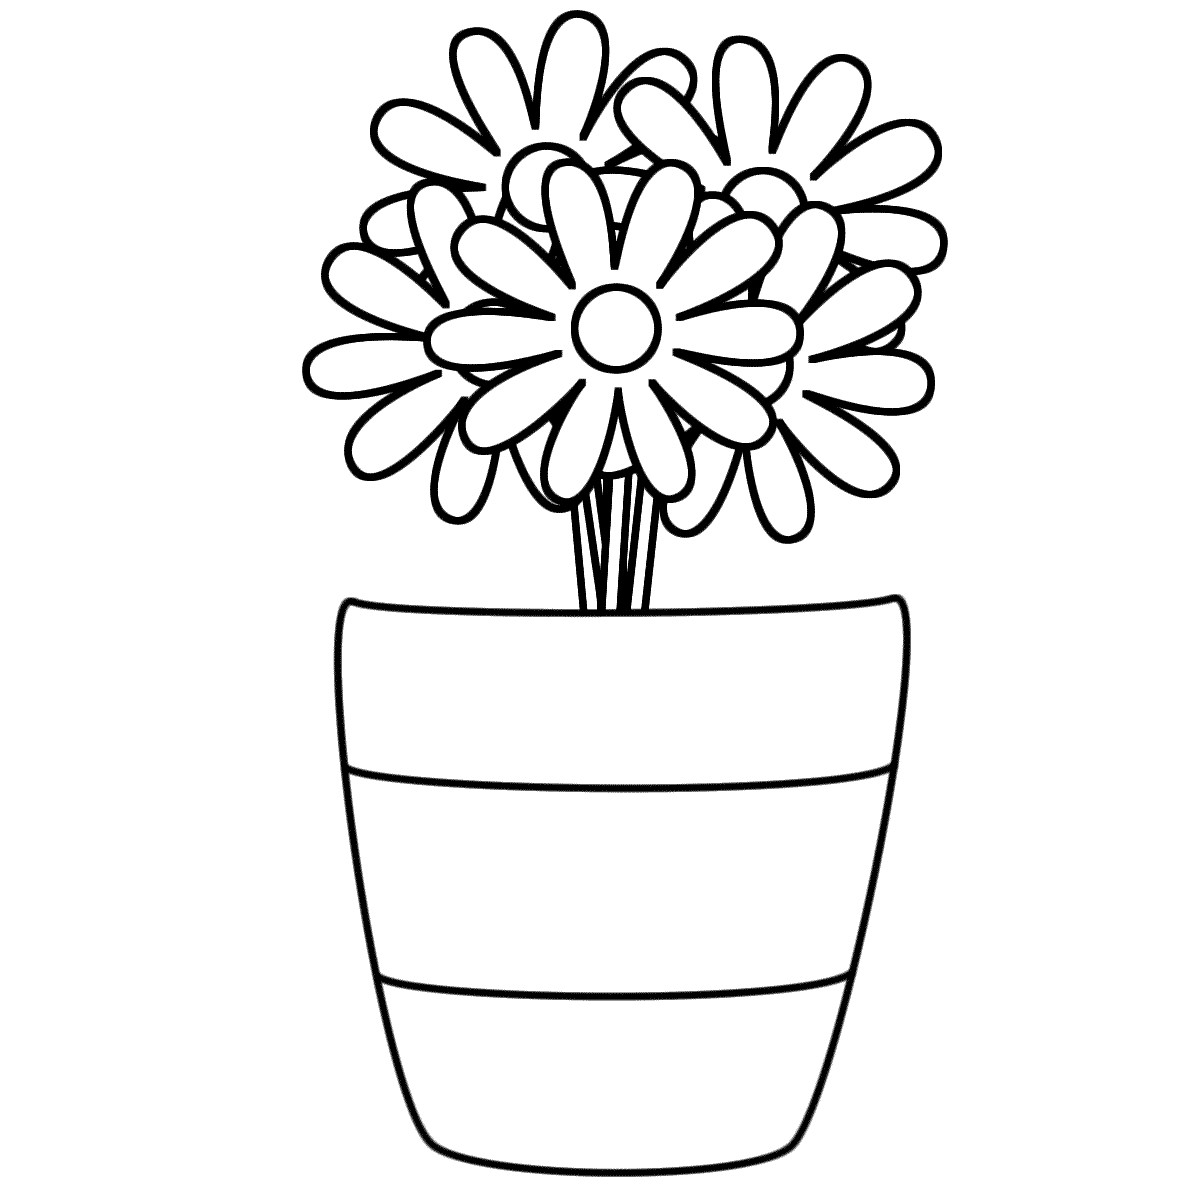 Vase Drawing For Kids at GetDrawings Free download